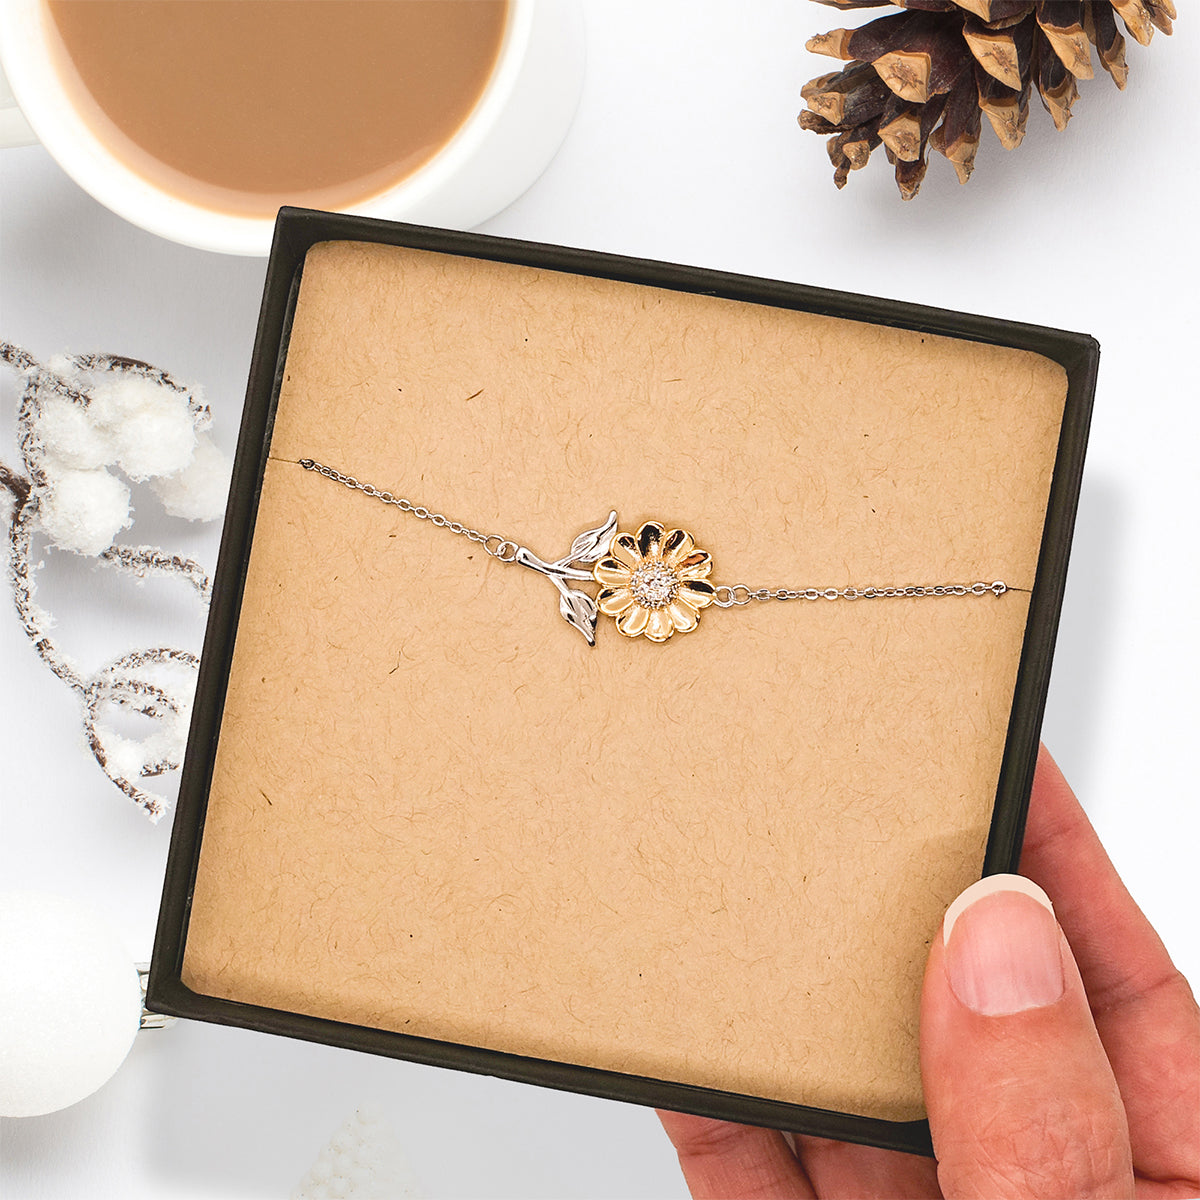 Ouma Sunflower Bracelet - A Unique Gift To Show Your Love and Gratitude - Engraved Hope and Inspirational Confidence - Perfect Birthday, Christmas, and Graduation Present for Ouma